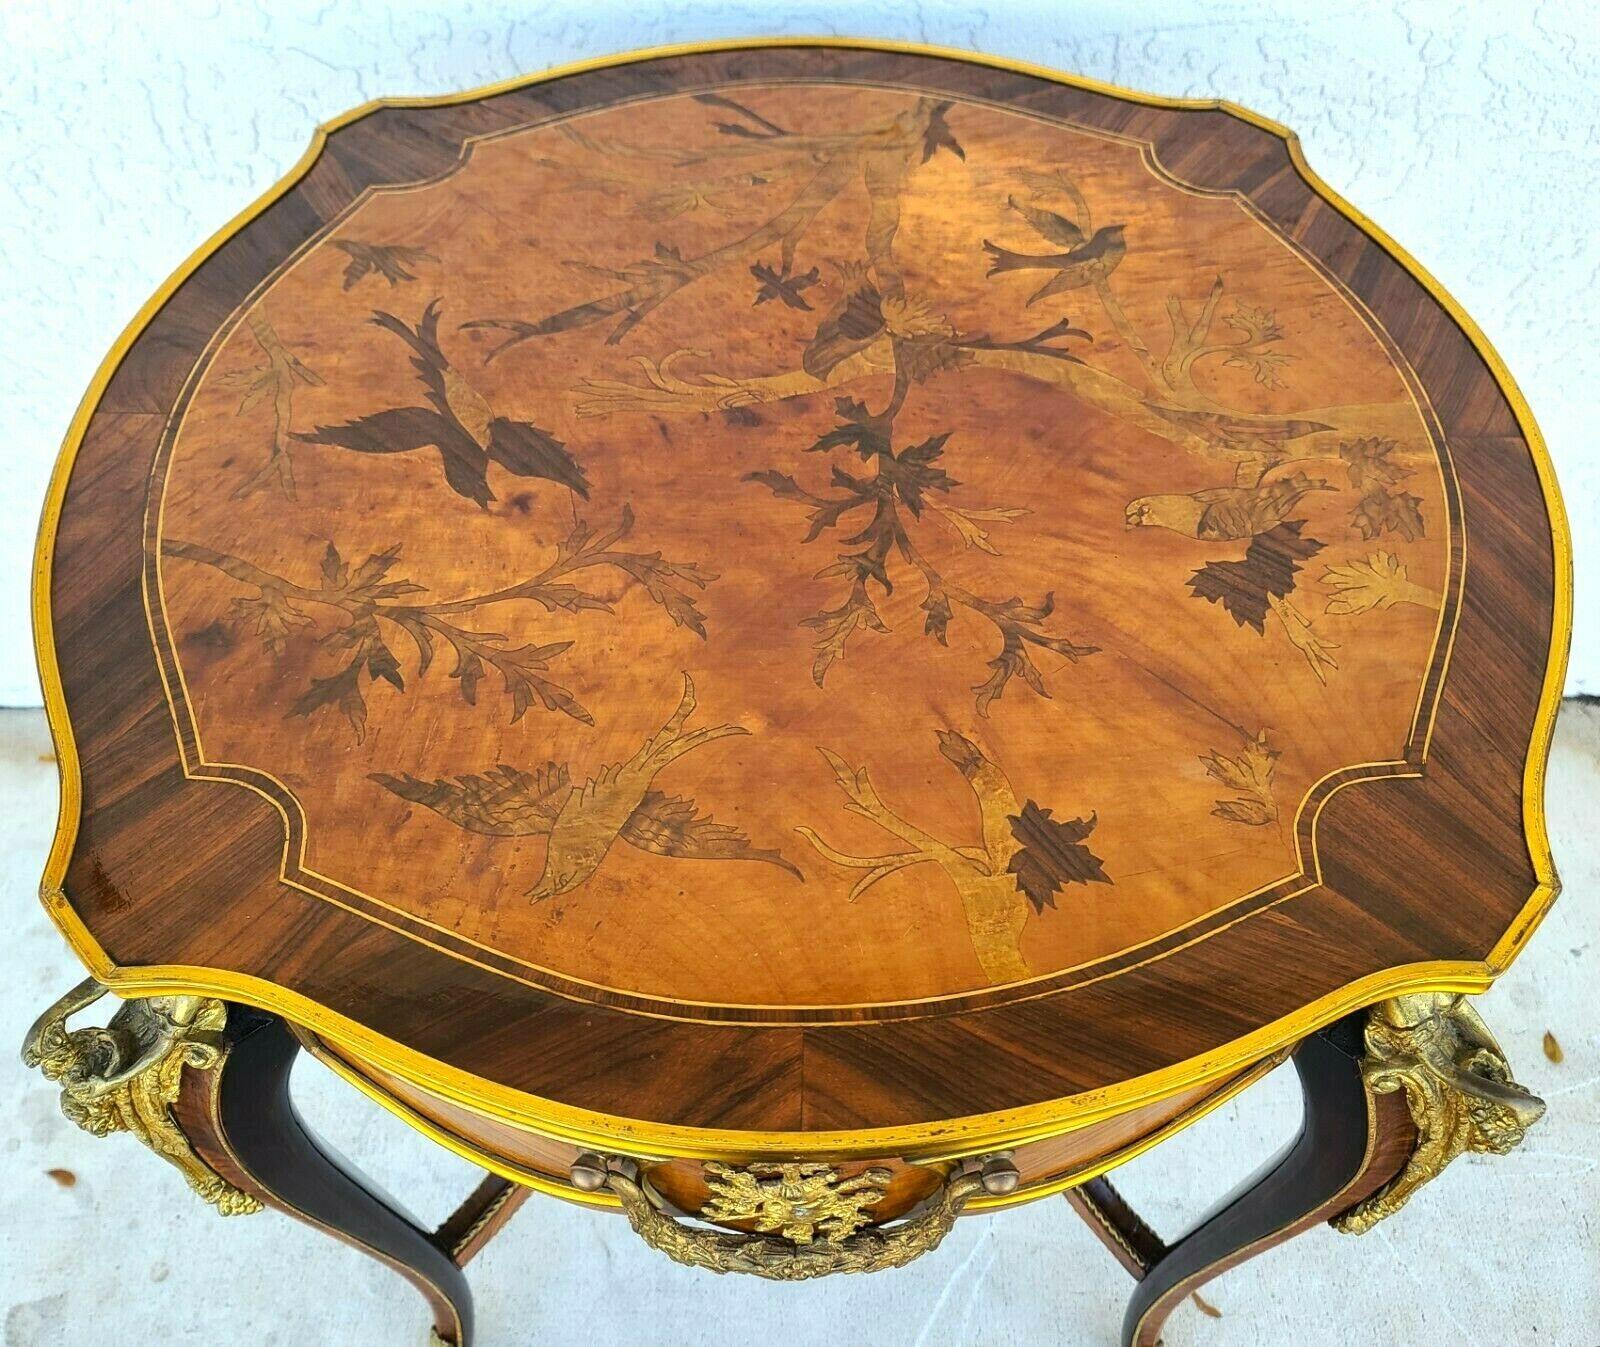 For FULL item description be sure to click on CONTINUE READING at the bottom of this listing.

Offering One Of Our Recent Palm Beach Estate Fine Furniture Acquisitions Of A 
LOUIS XV ORMOLU MOUNTED & INLAID MARQUETRY OCCASIONAL Table 
Featuring